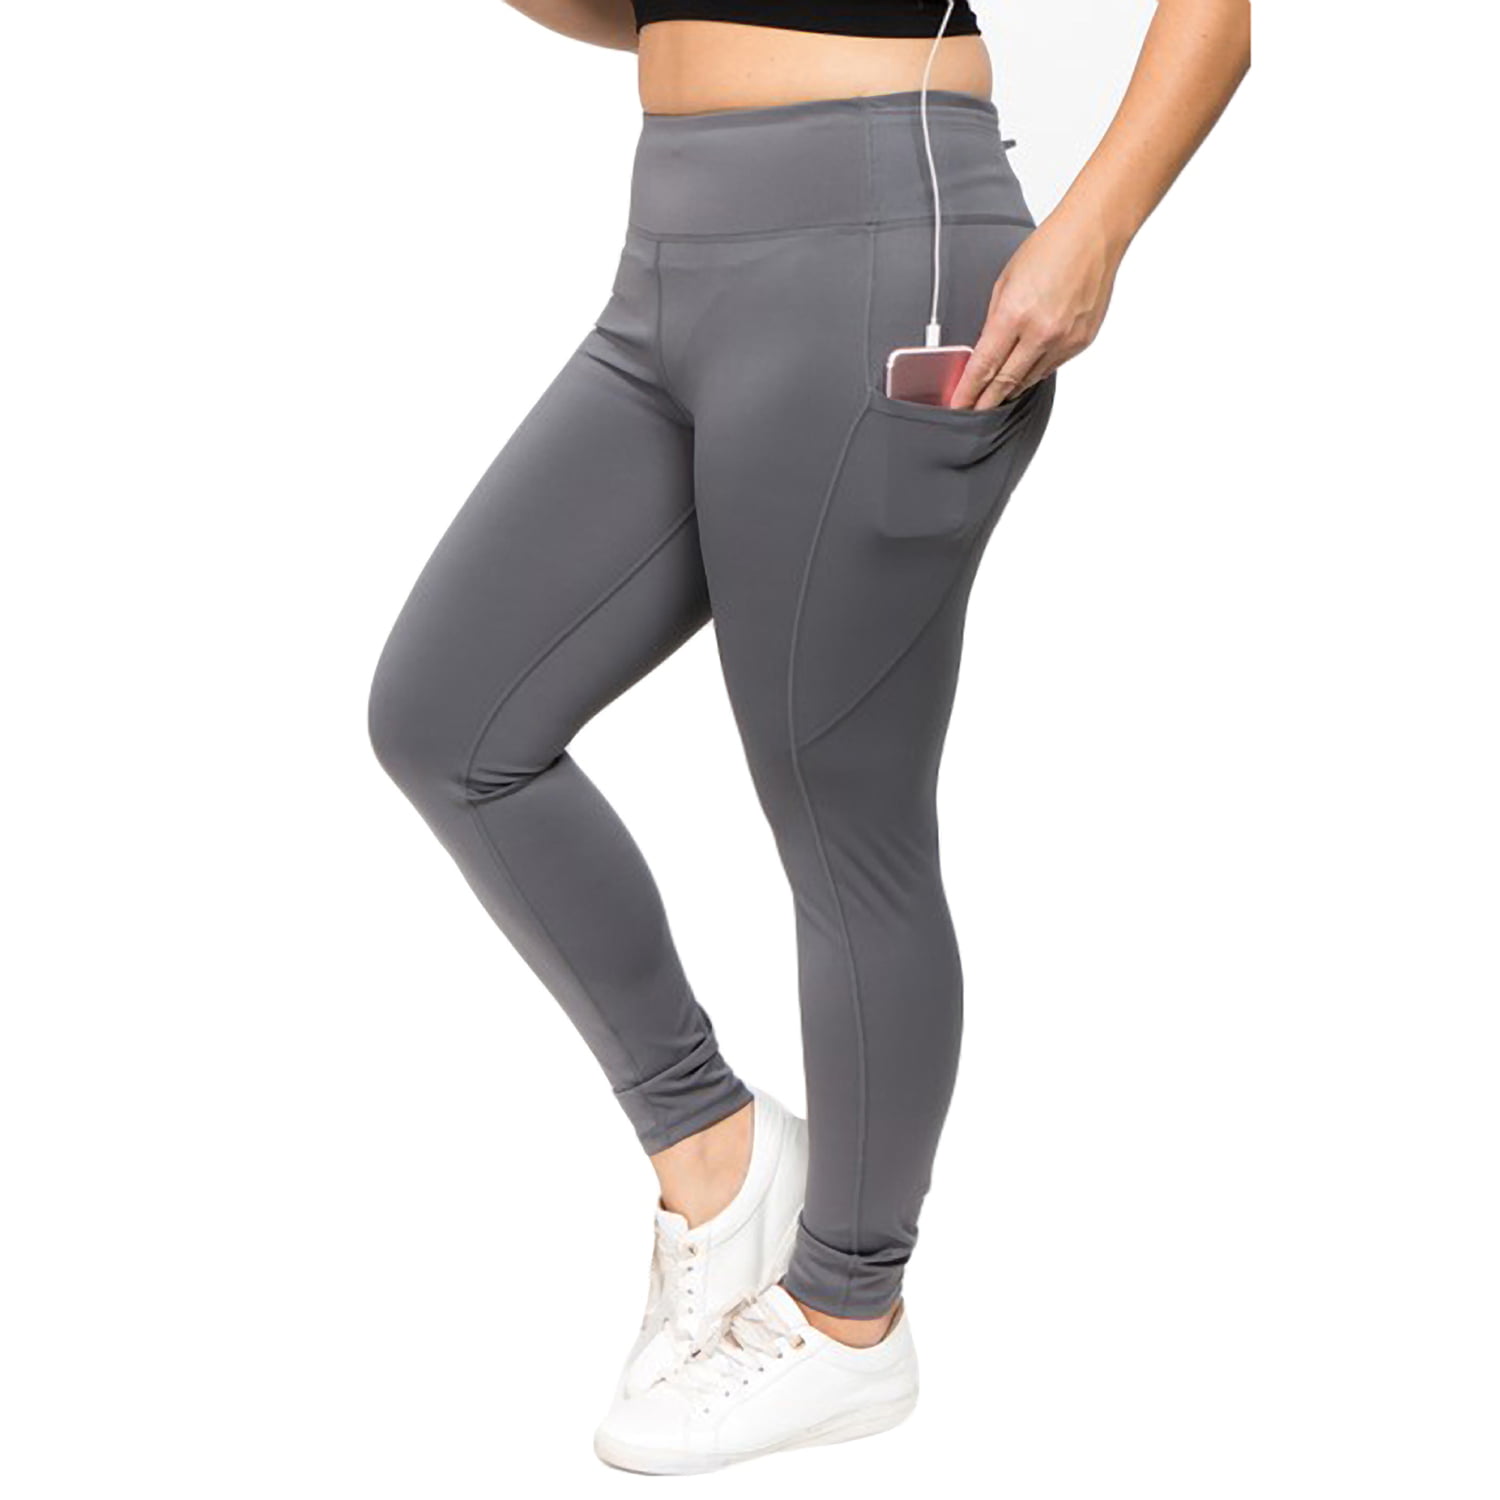  KOGMO Womens Active Workout Full Length Cotton